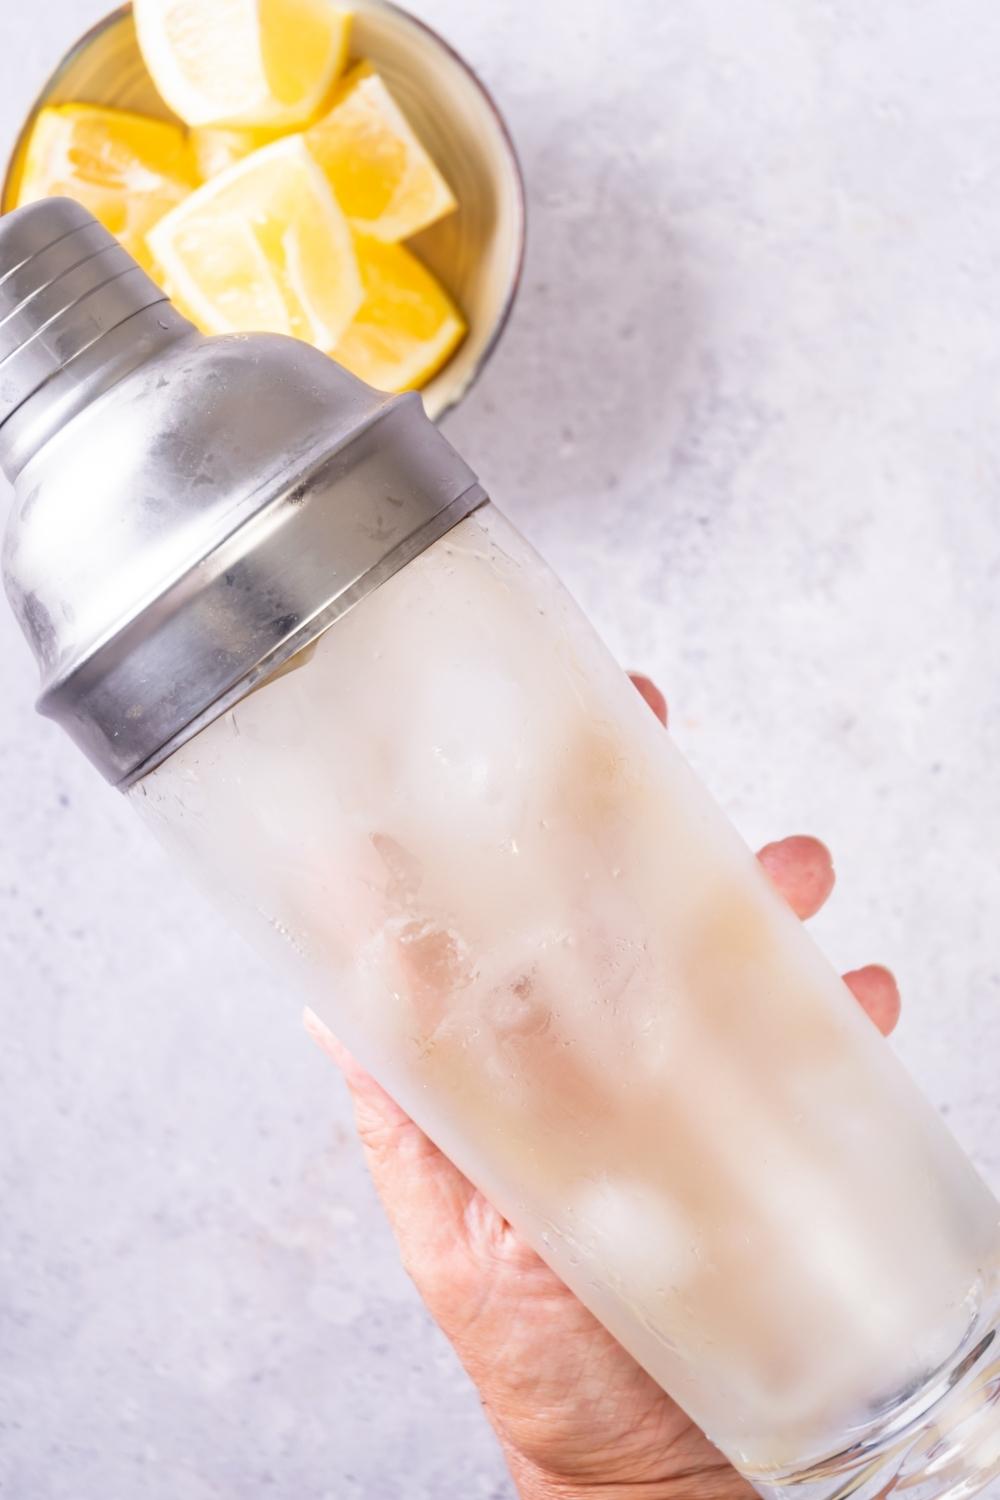 A hand shaking a cocktail shaker filled with a white tea shot.